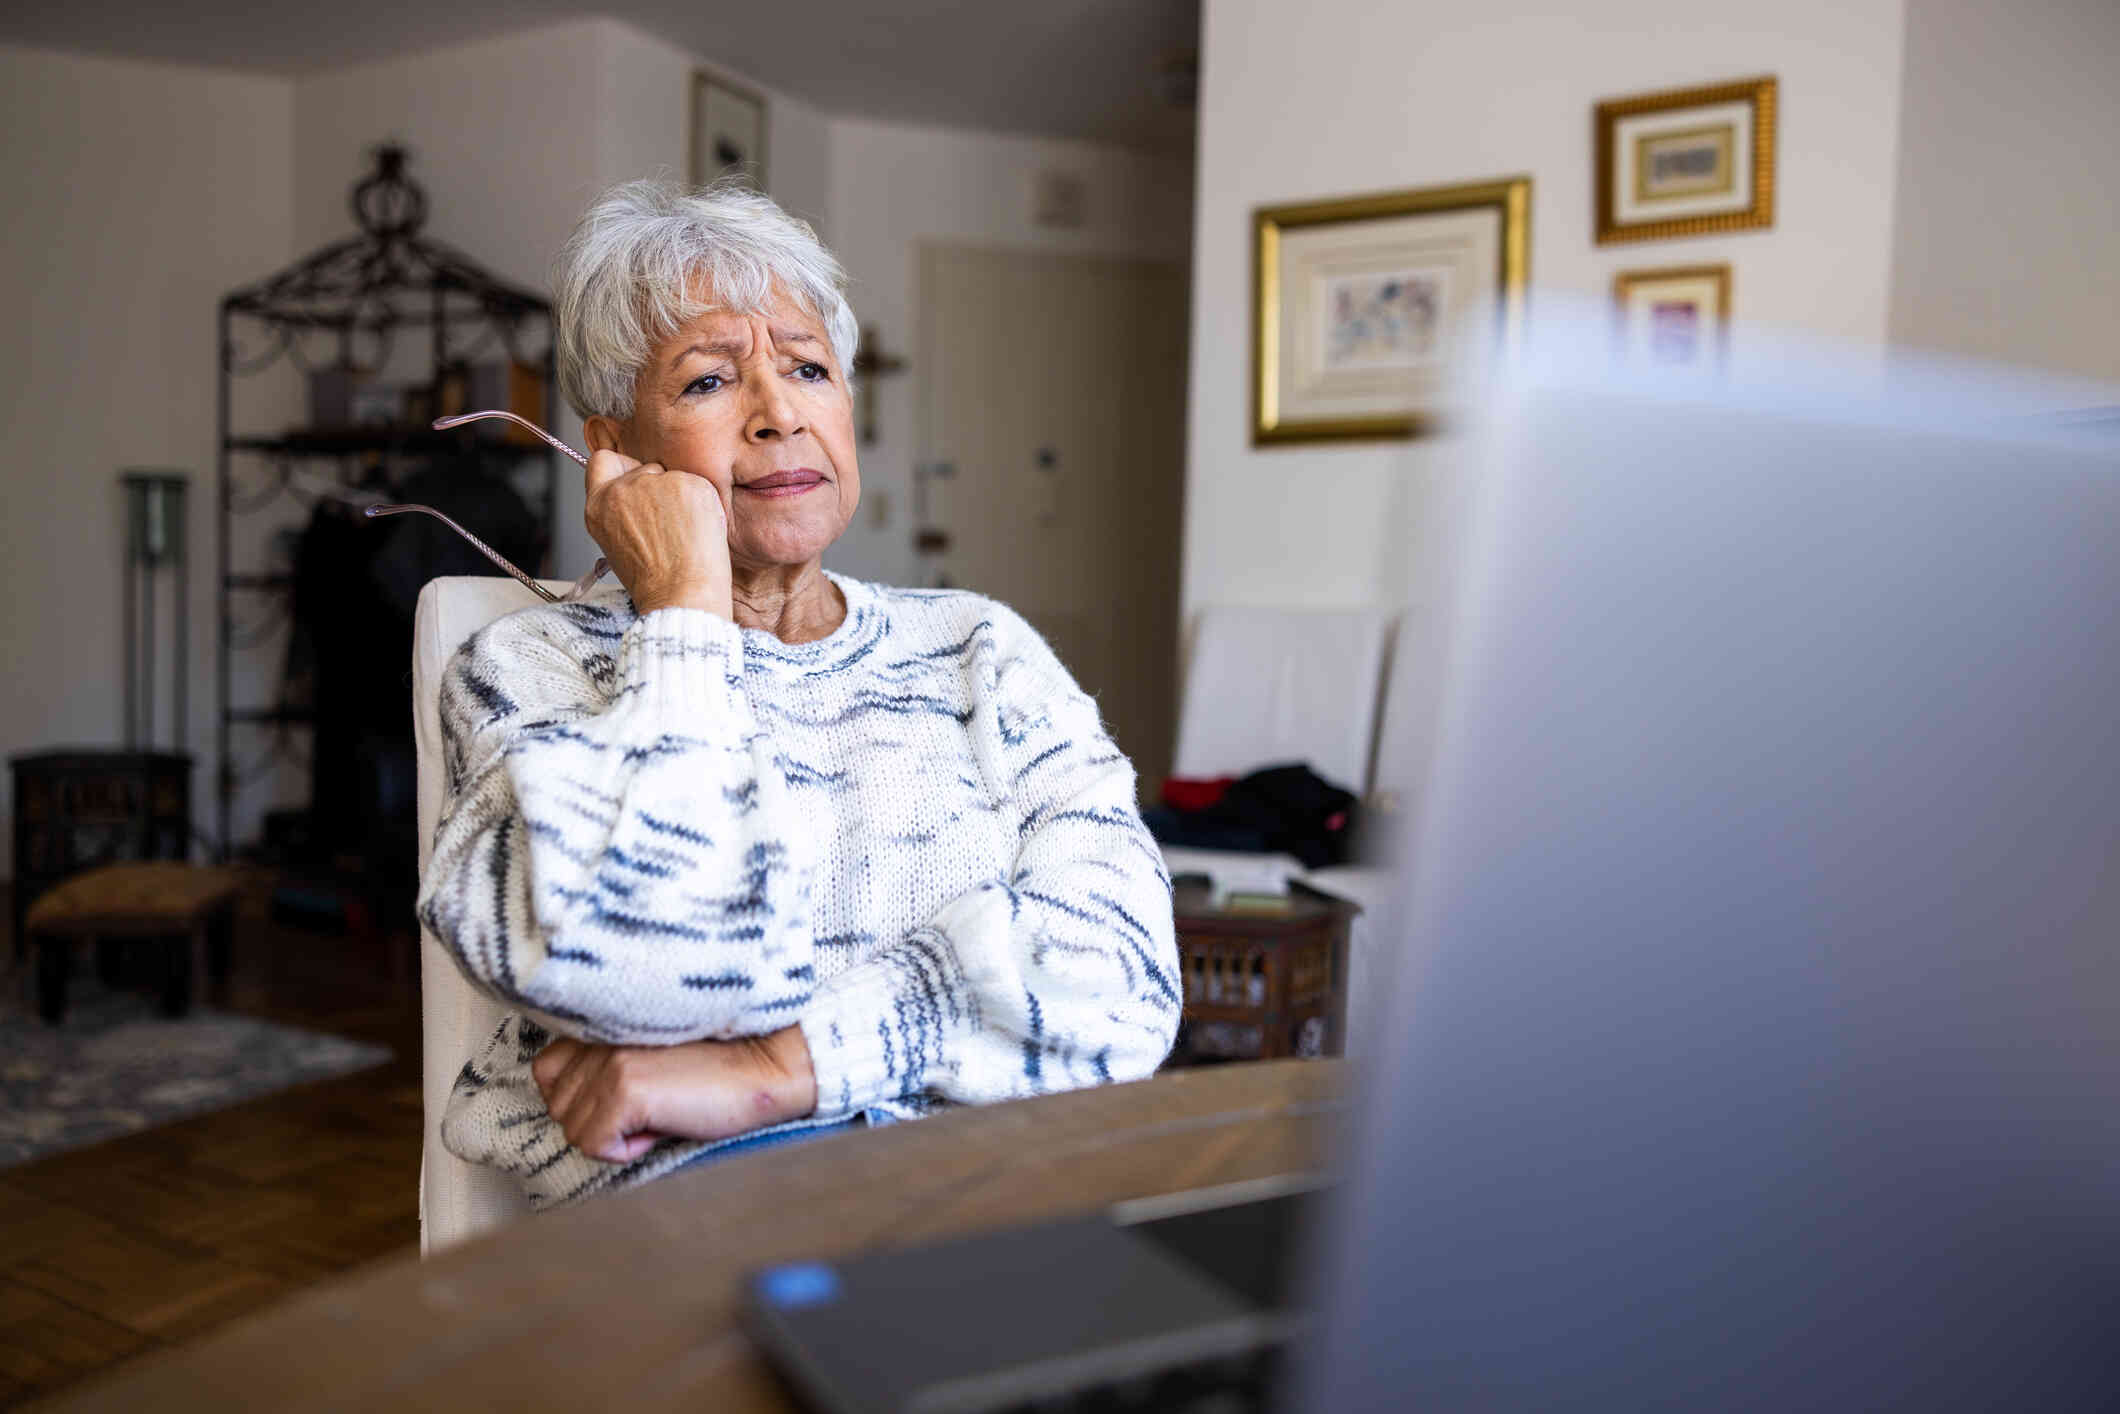 An elderly woman sits at a table with her tablet infront of her and holds her glasses while looking at the tablet with a worried expression.